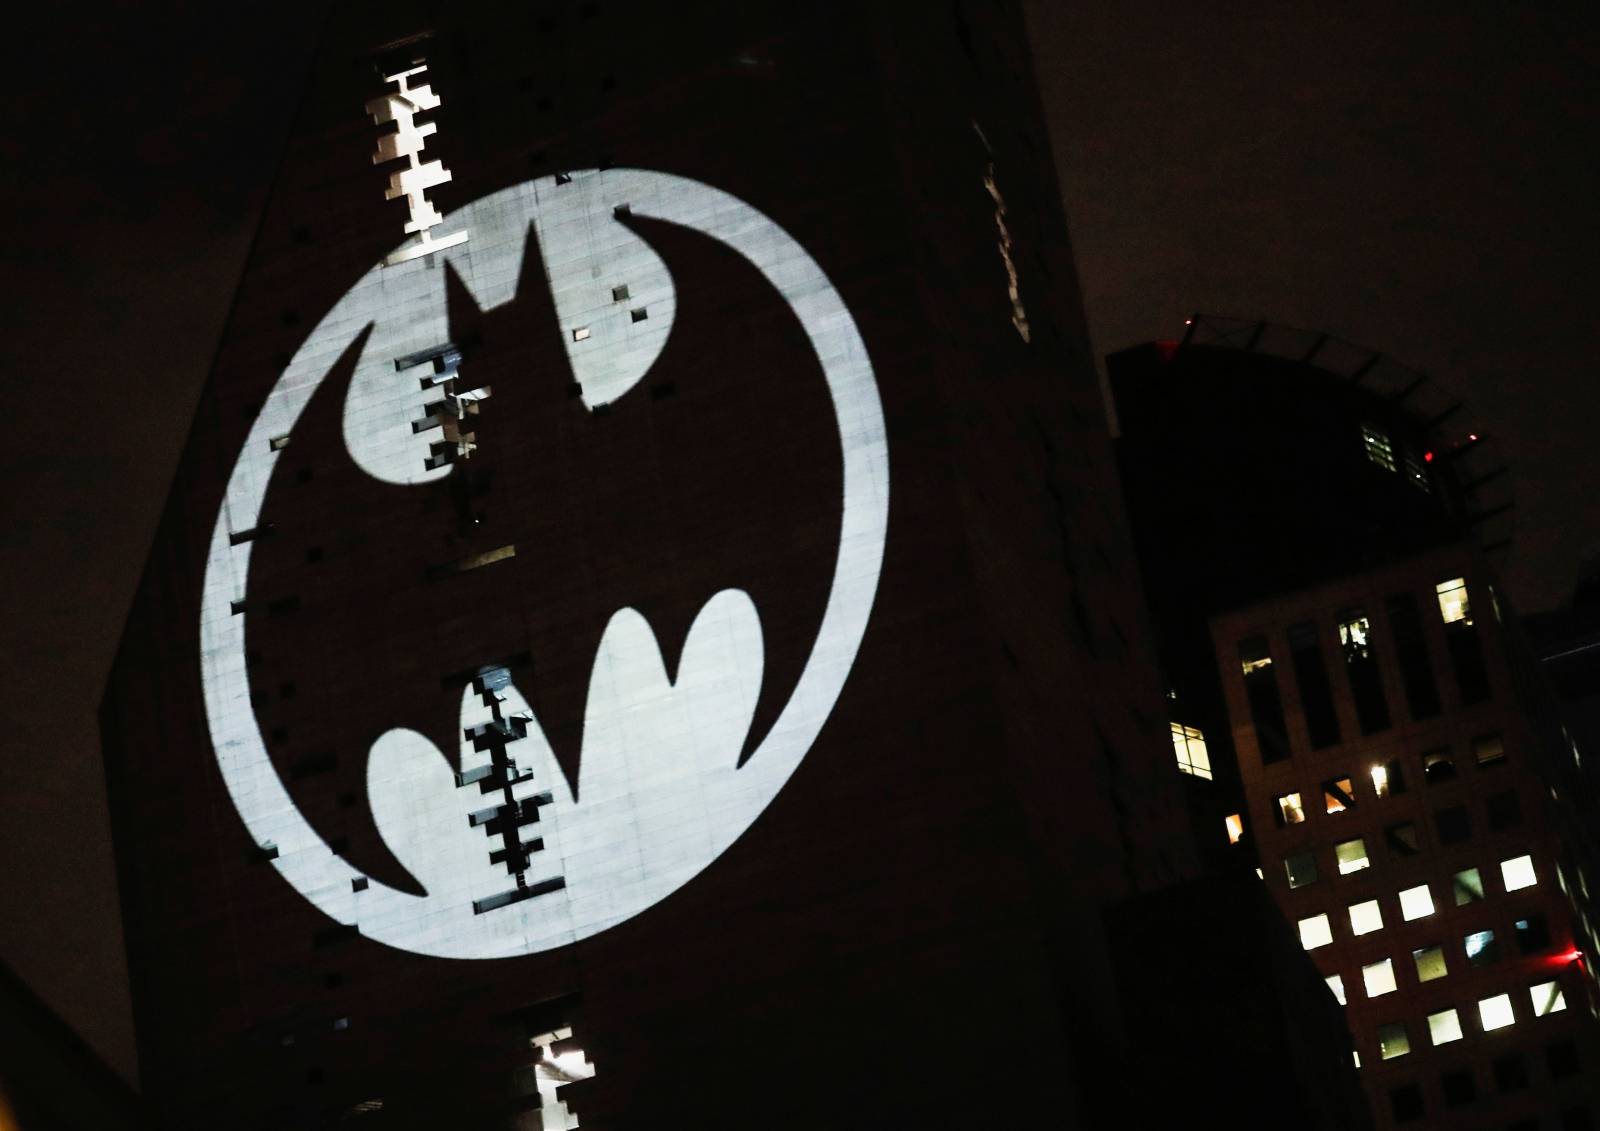 A Bat-Signal is projected onto a building at night as Batman fans celebrate the 80th anniversary of the first appearance of the DC Comics superhero, in Mexico City